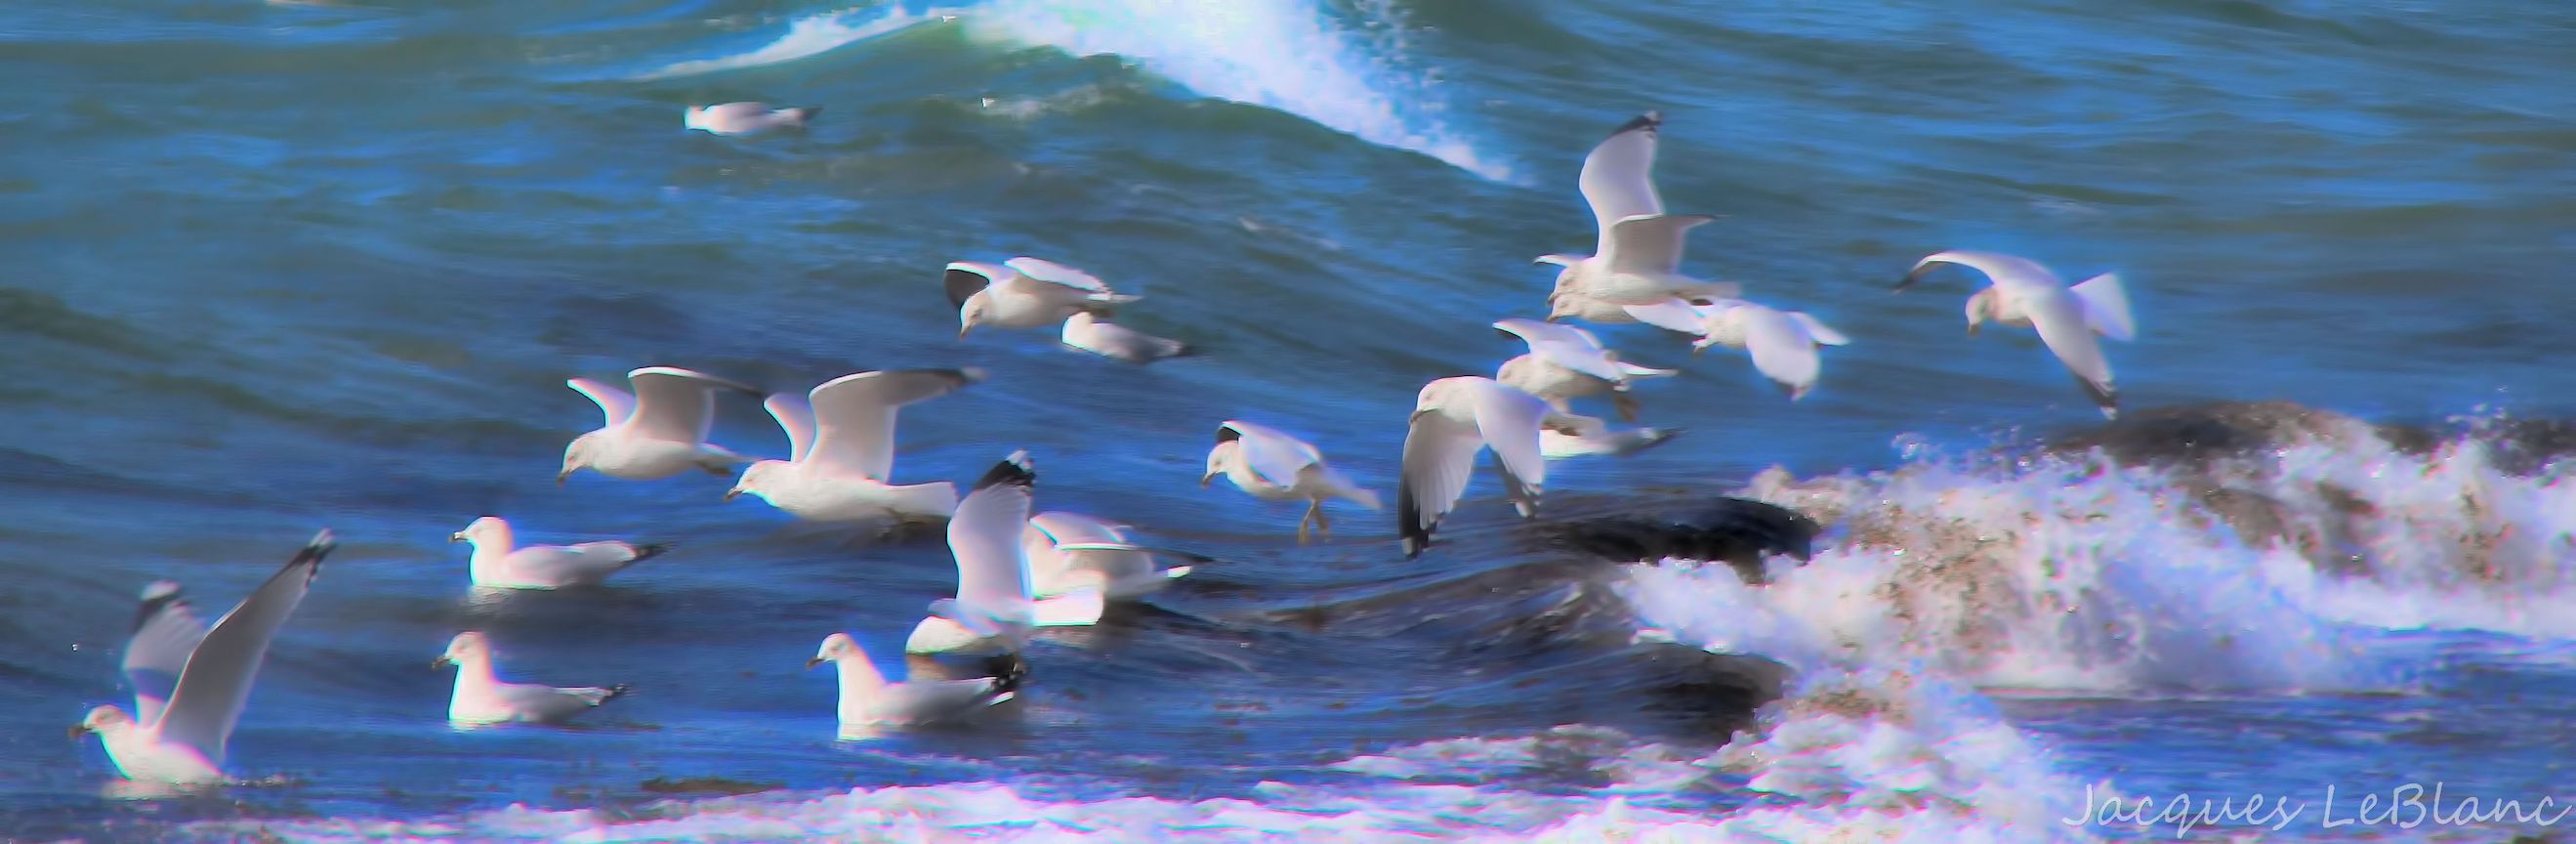 A flock of seagulls rding the waves at Foster Long Memorial Beach, Sag Harbor, NY